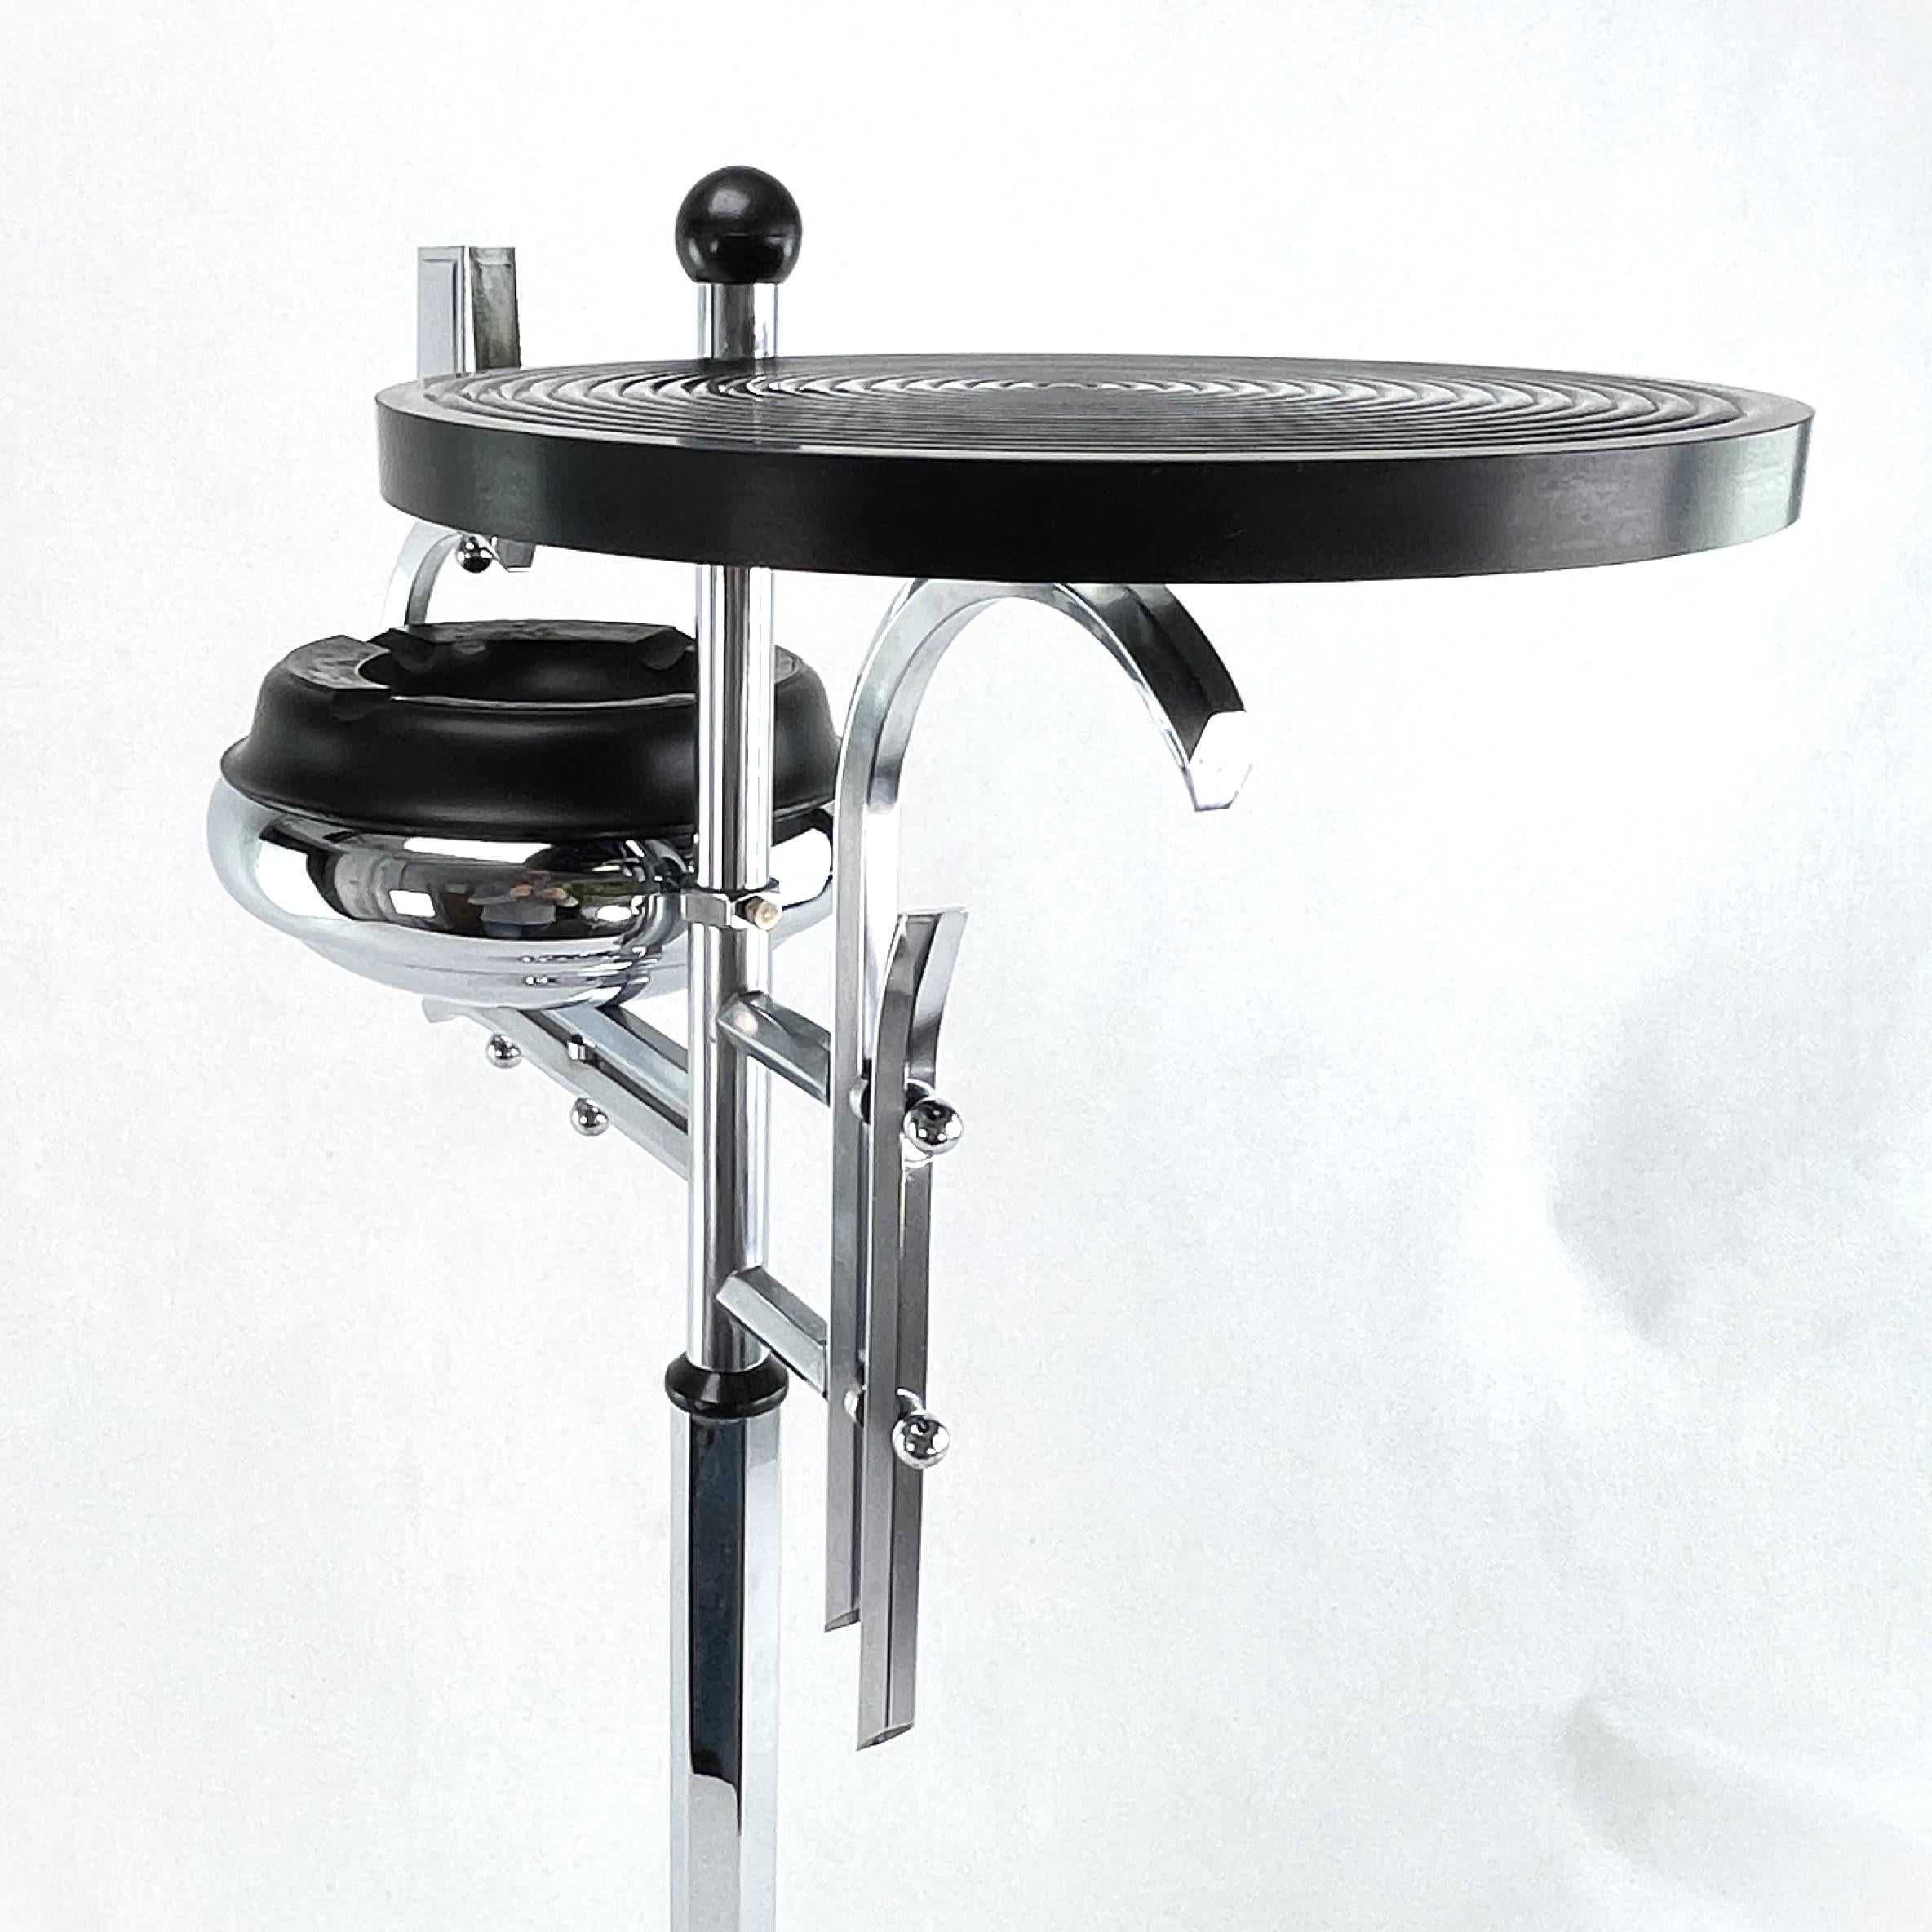 Art Deco Ashtray Stand, Chrome and Bakelite by Demeyere, Belgium, 1930s For Sale 4